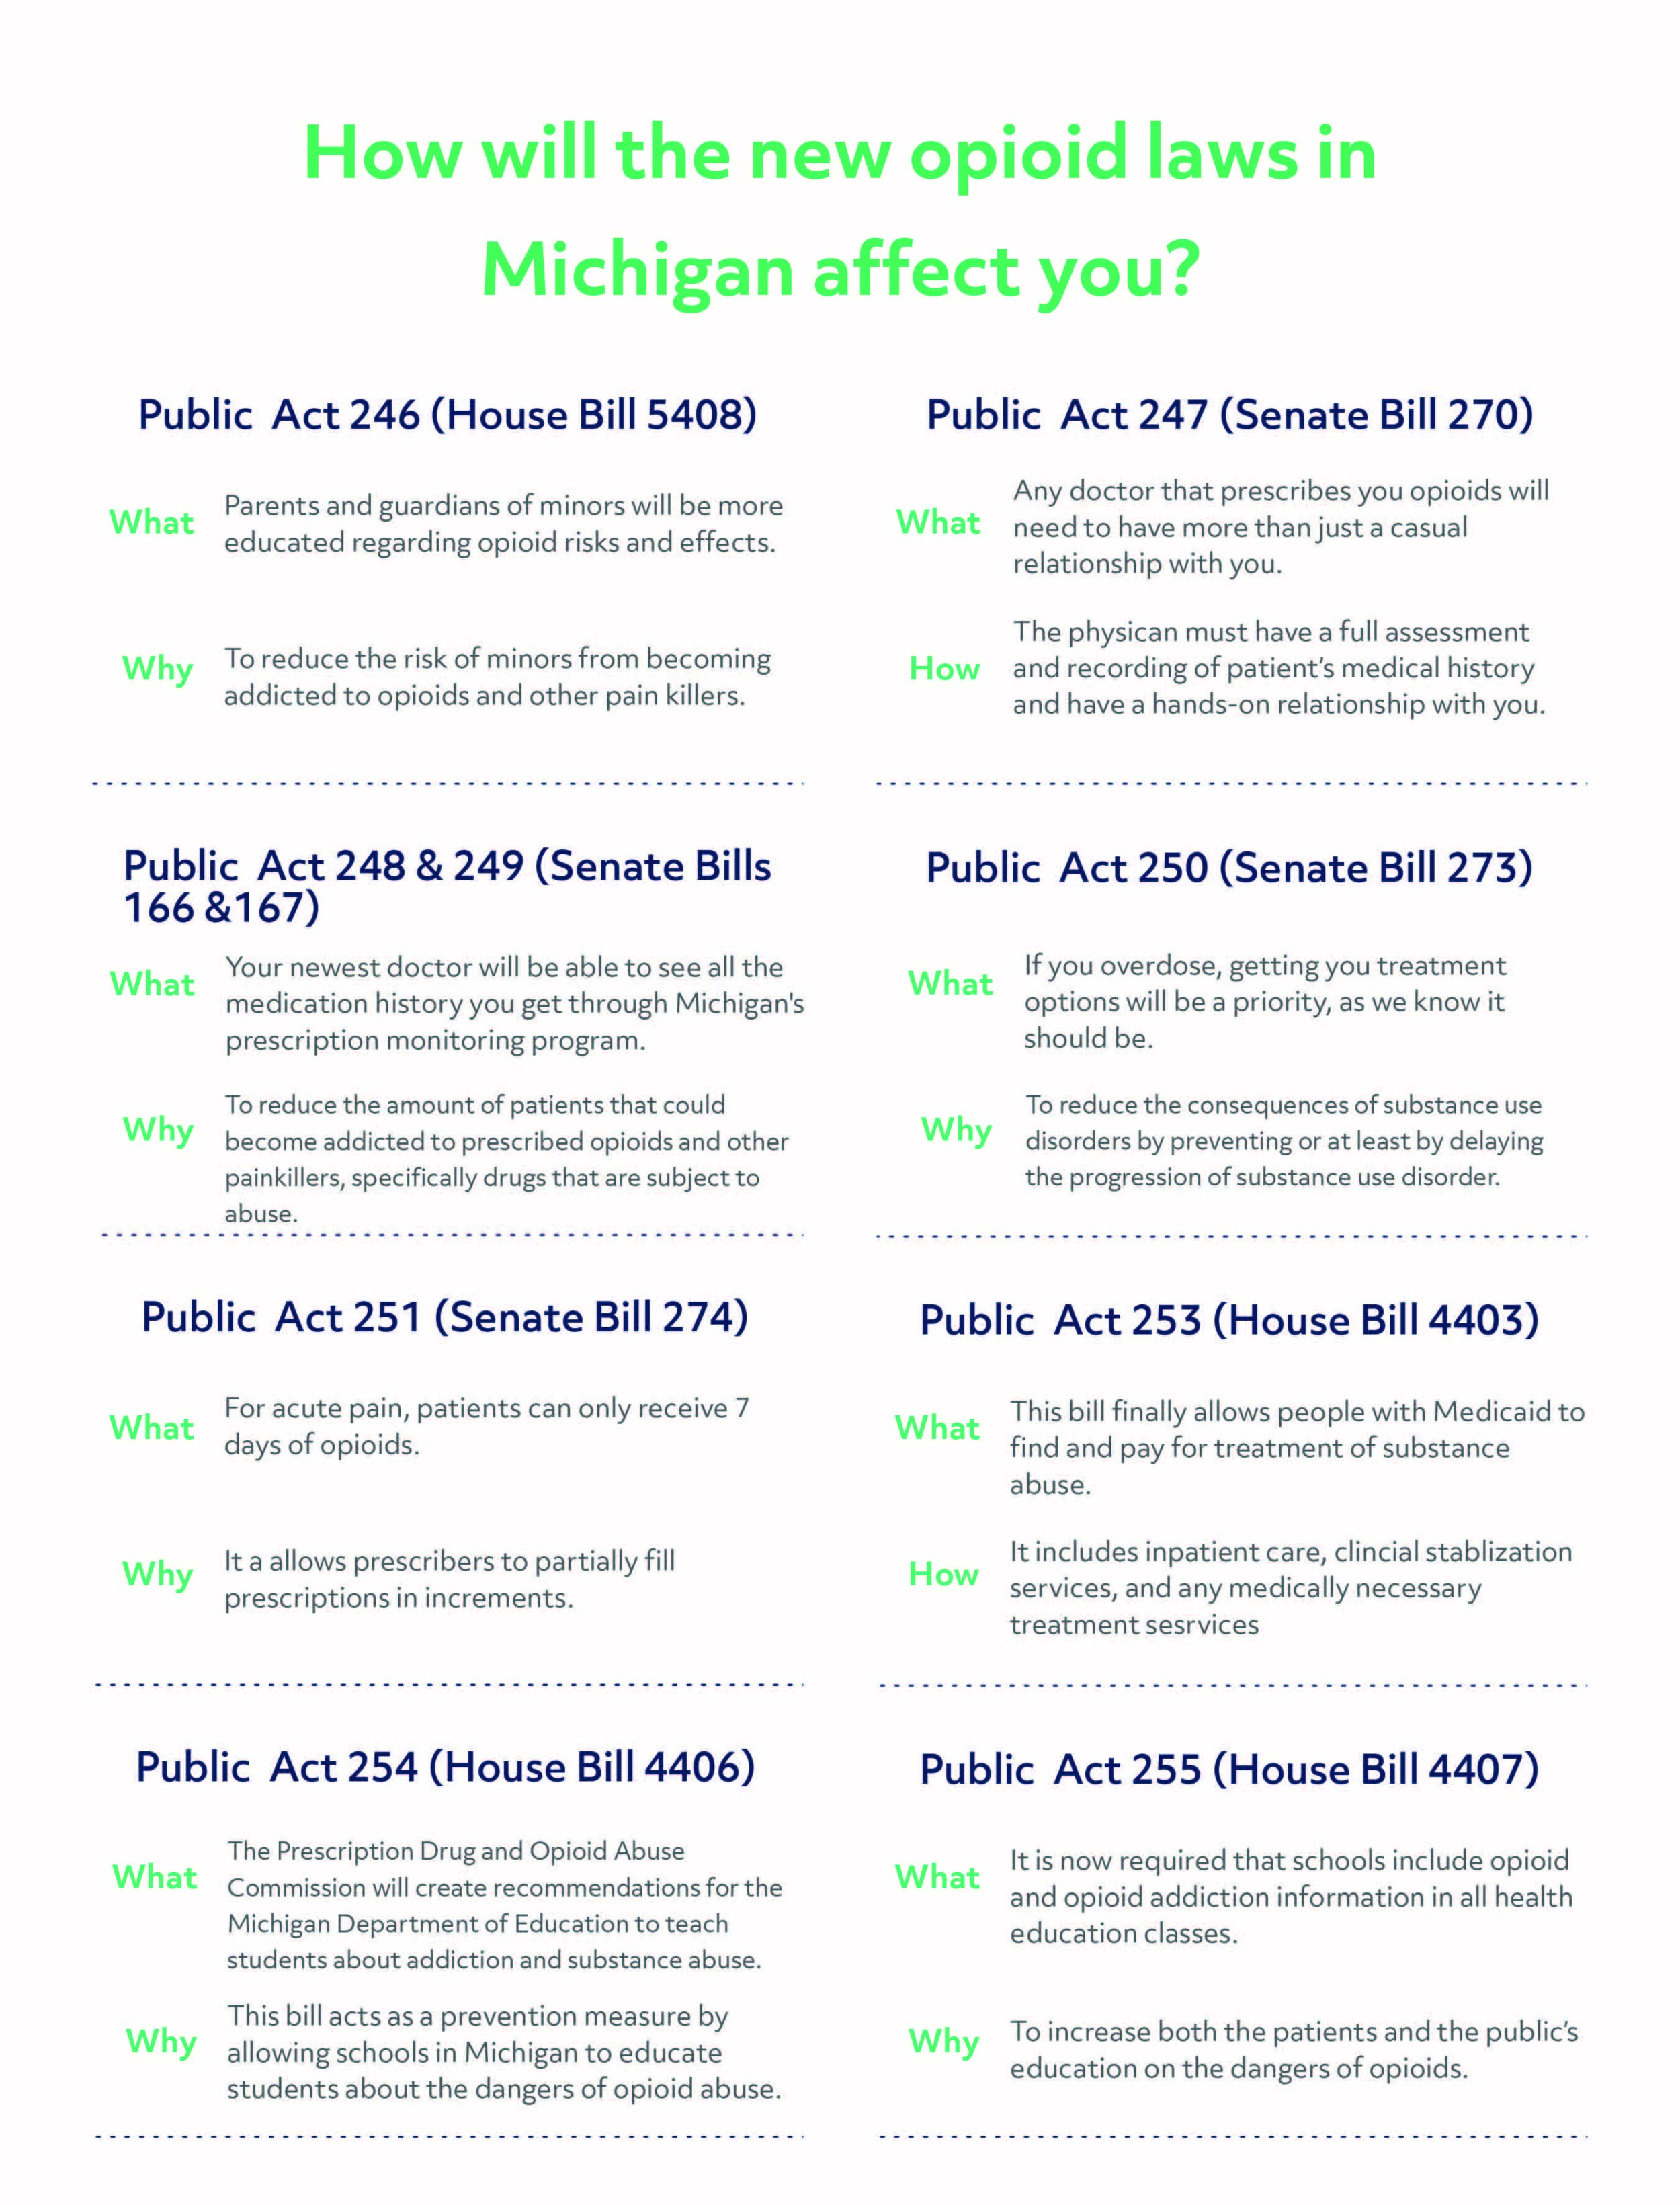  An infographic explaining the new opioid laws in Michigan 